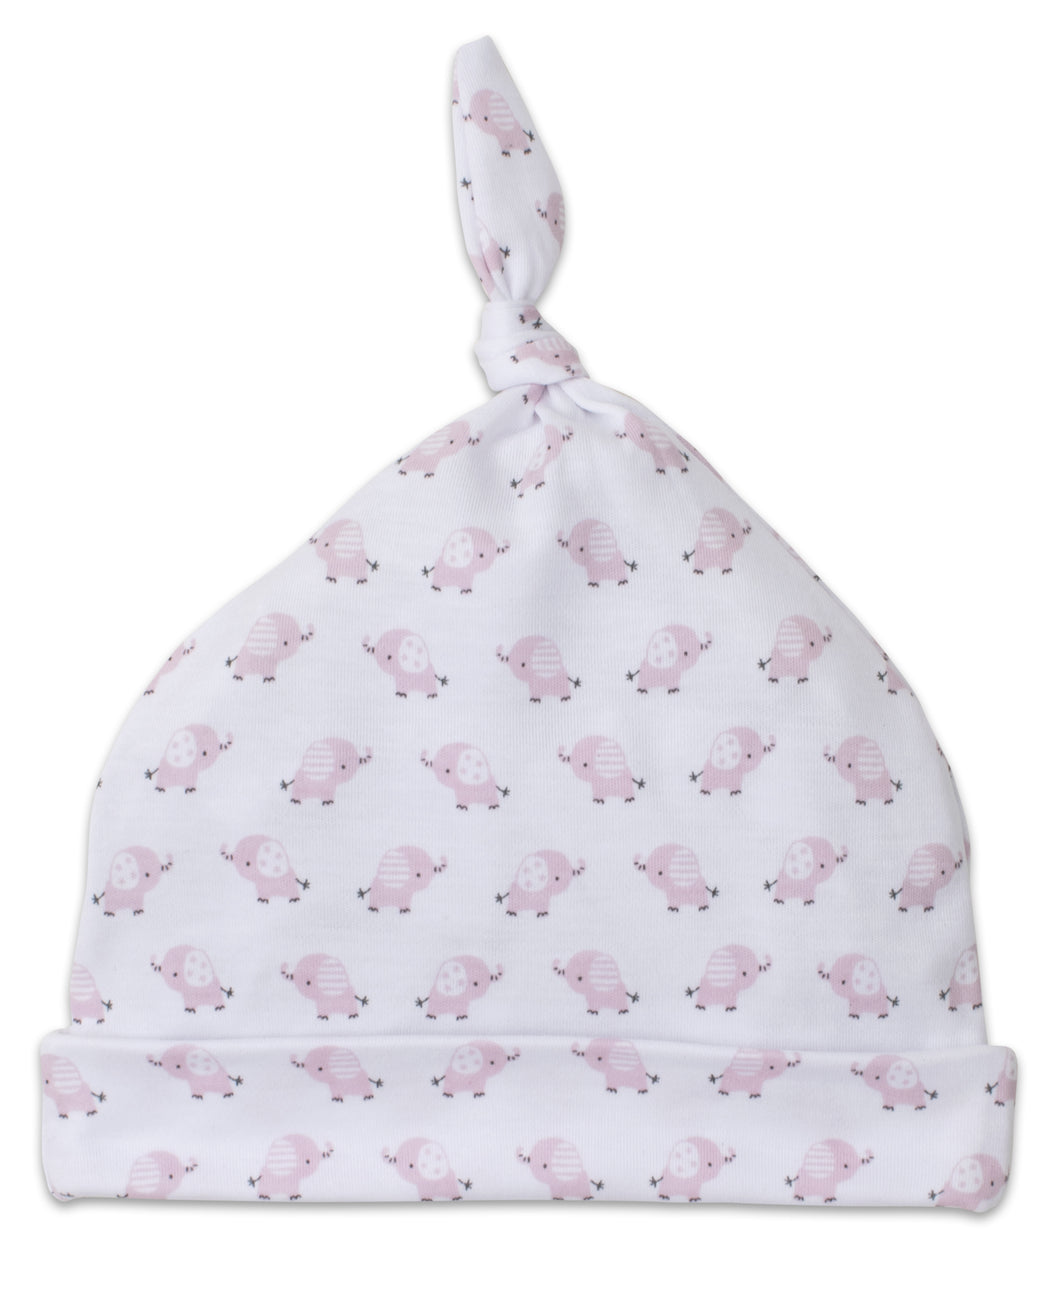 Baby Trunks Hat - Pink